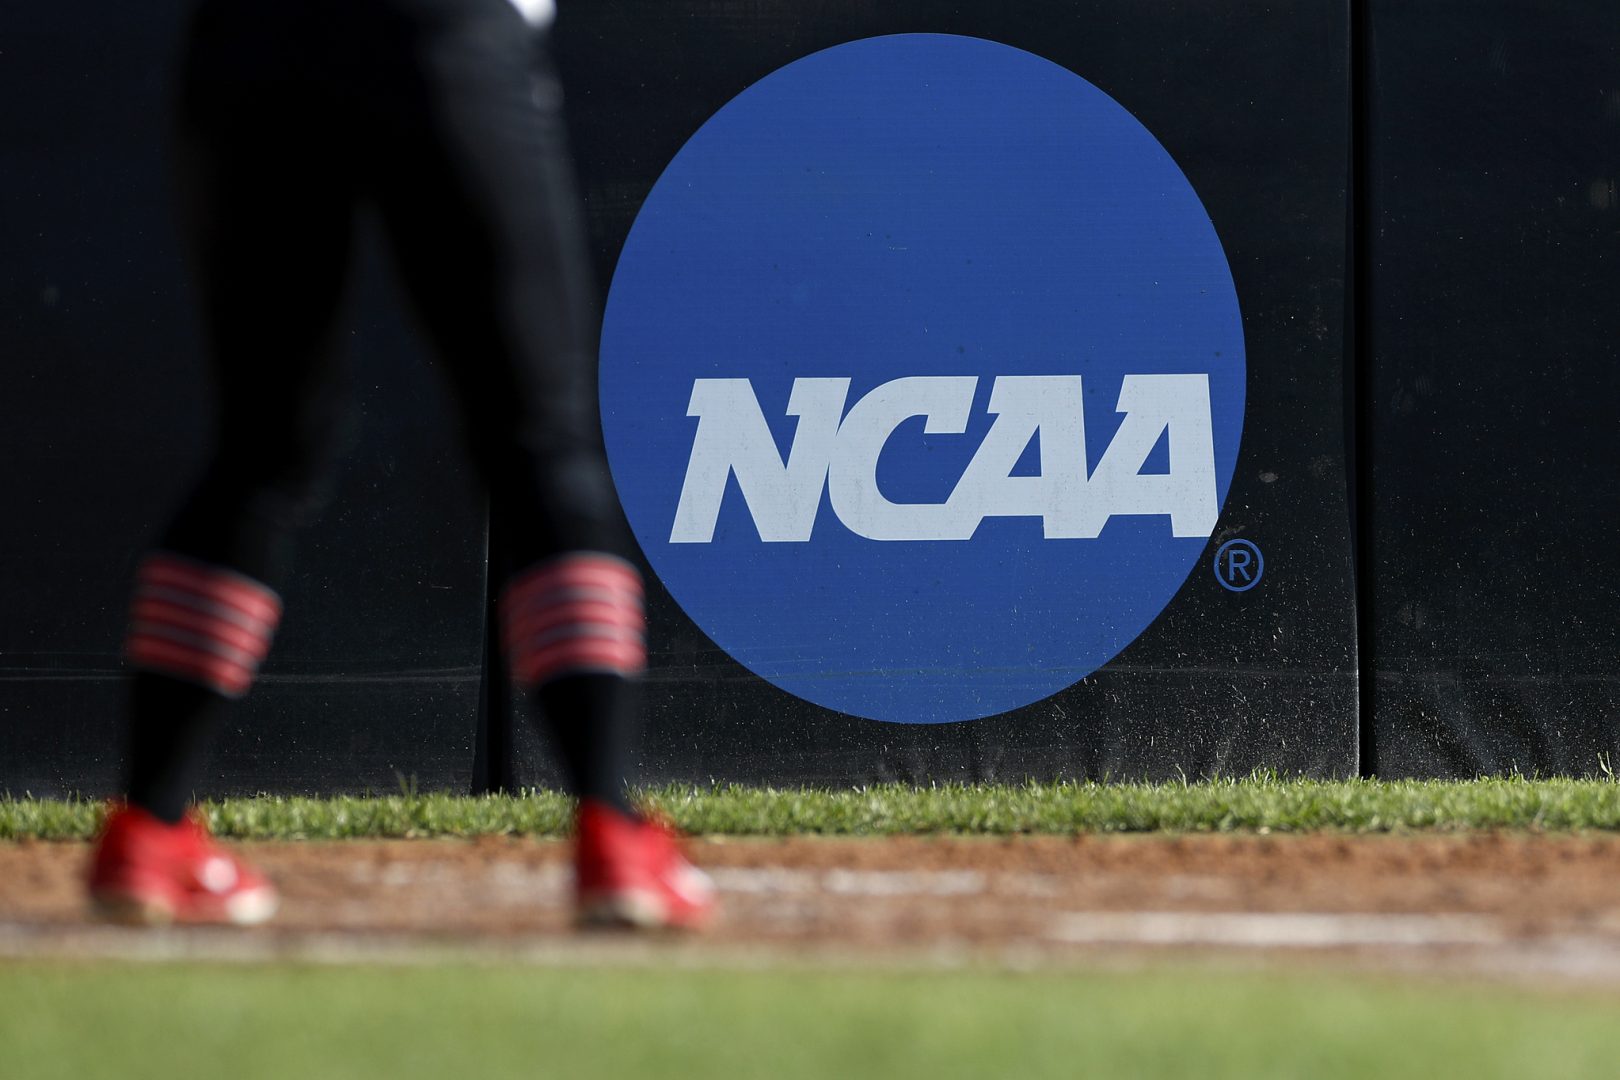 FILE PHOTO: In this April 19, 2019, file photo, an athlete stands near a NCAA logo during a softball game in Beaumont, Texas. The NCAA is poised to take a significant step toward allowing college athletes to earn money without violating amateurism rules. The Board of Governors will be briefed Tuesday, Oct. 29 by administrators who have been examining whether it would be feasible to allow college athletes to profit of their names, images and likenesses. A California law set to take effect in 2023 would make it illegal for NCAA schools in the state to prevent athletes from signing personal endorsement deals.